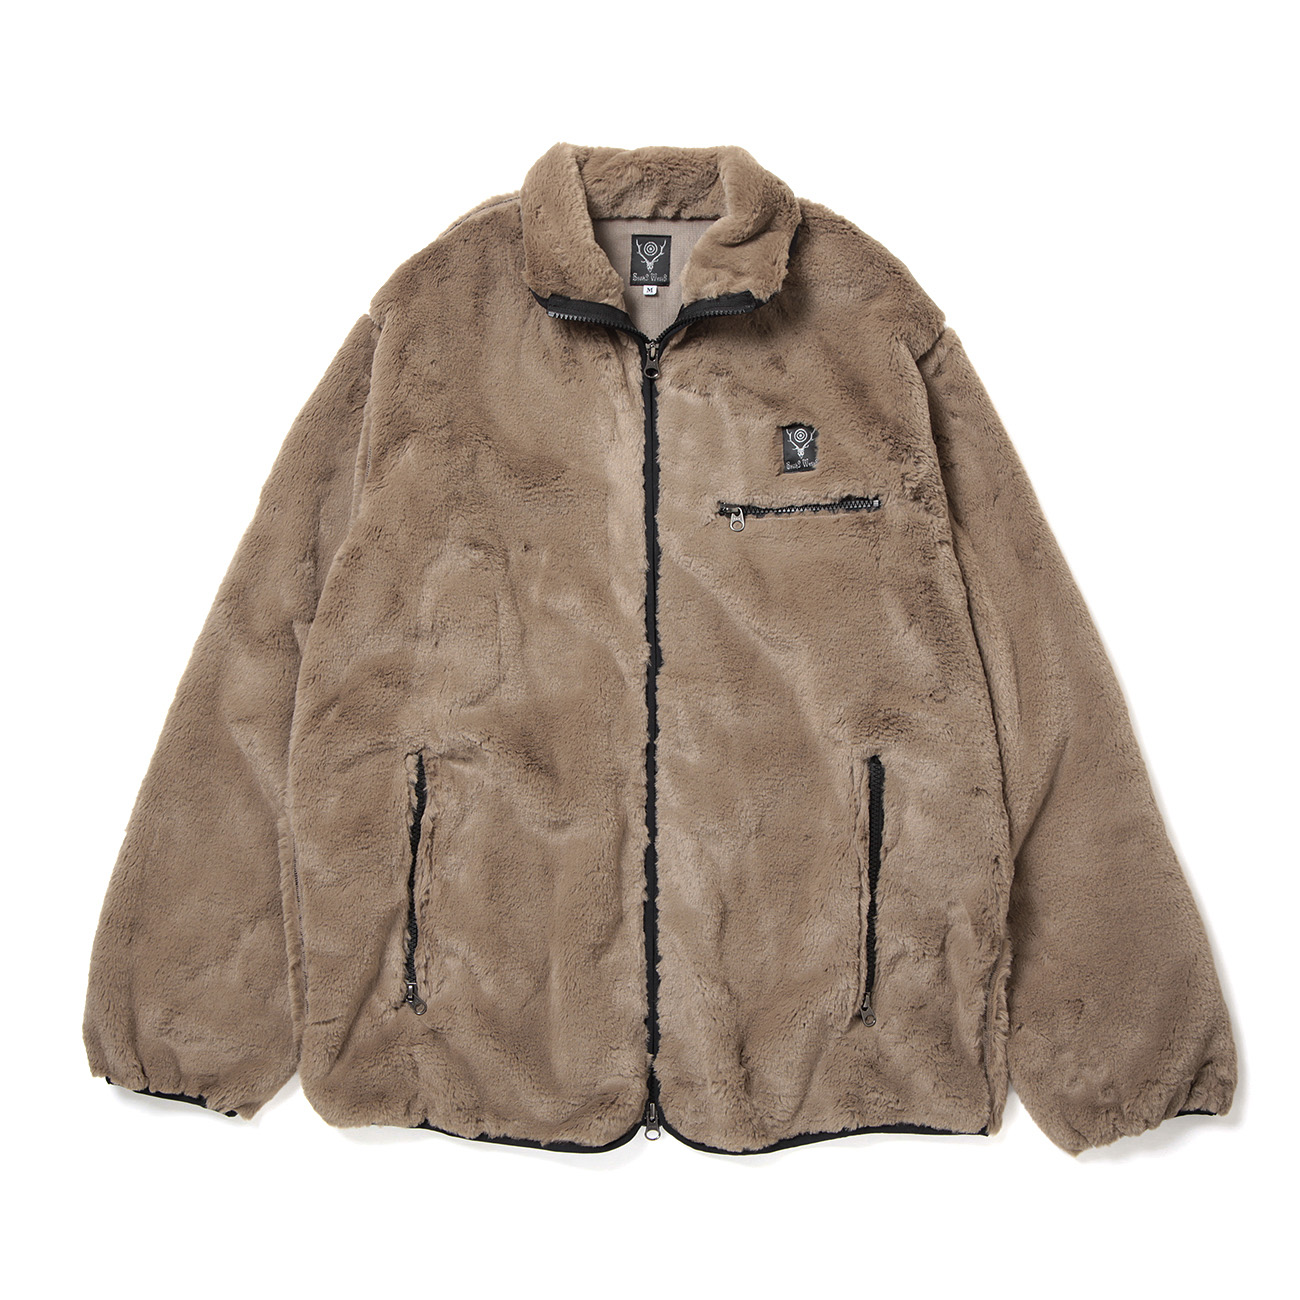 South2West8 Piping Jacket - Micro Fur - ブルゾン